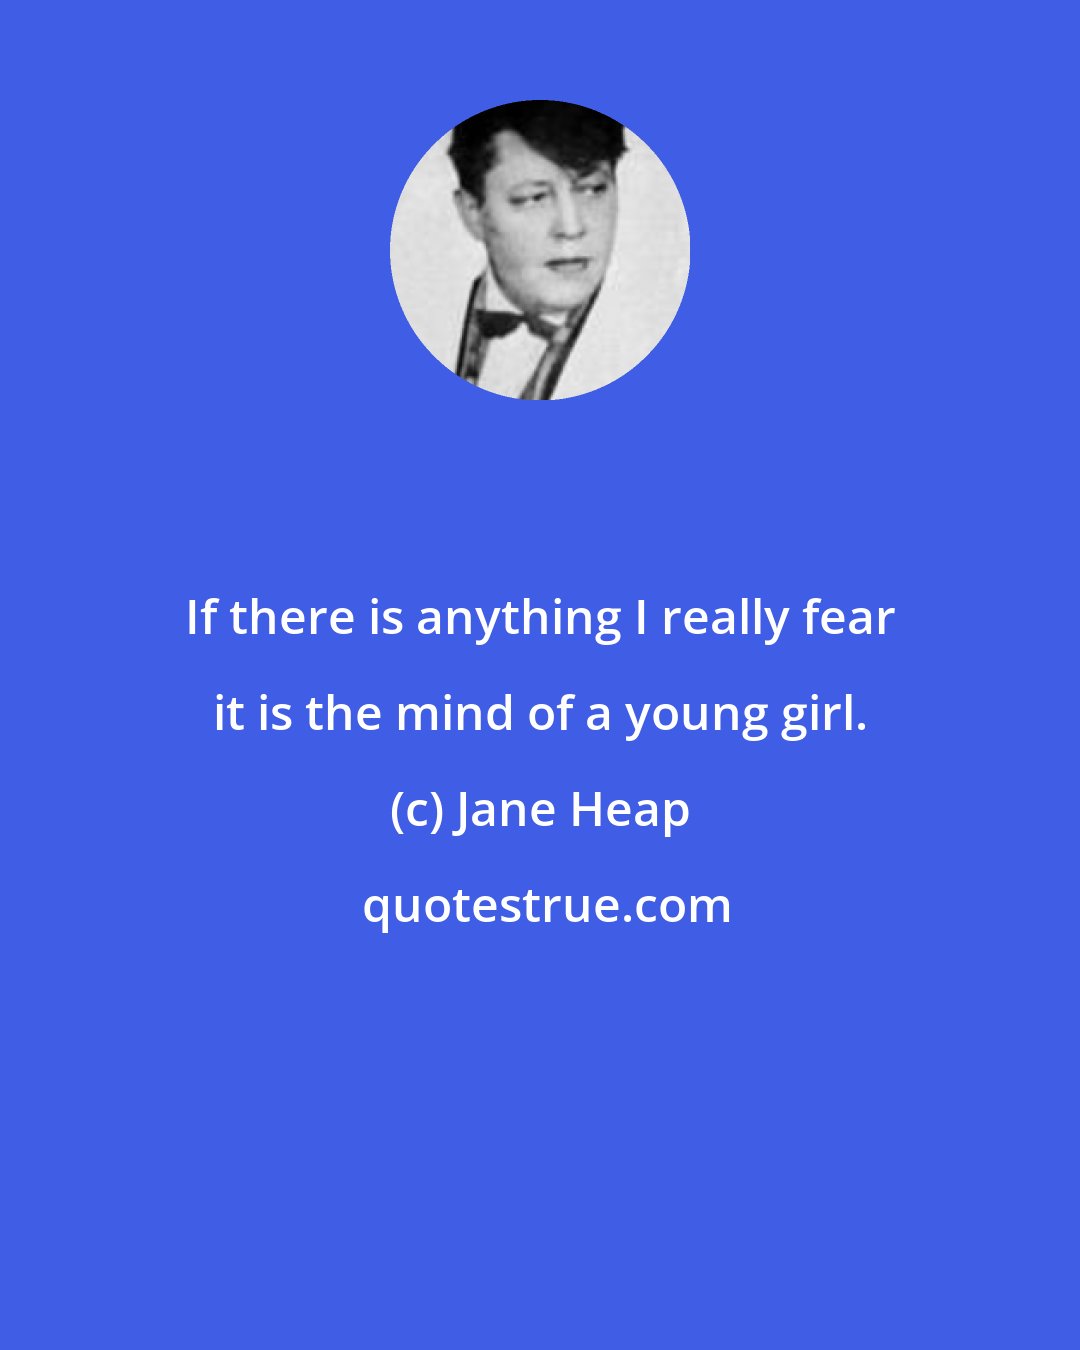 Jane Heap: If there is anything I really fear it is the mind of a young girl.